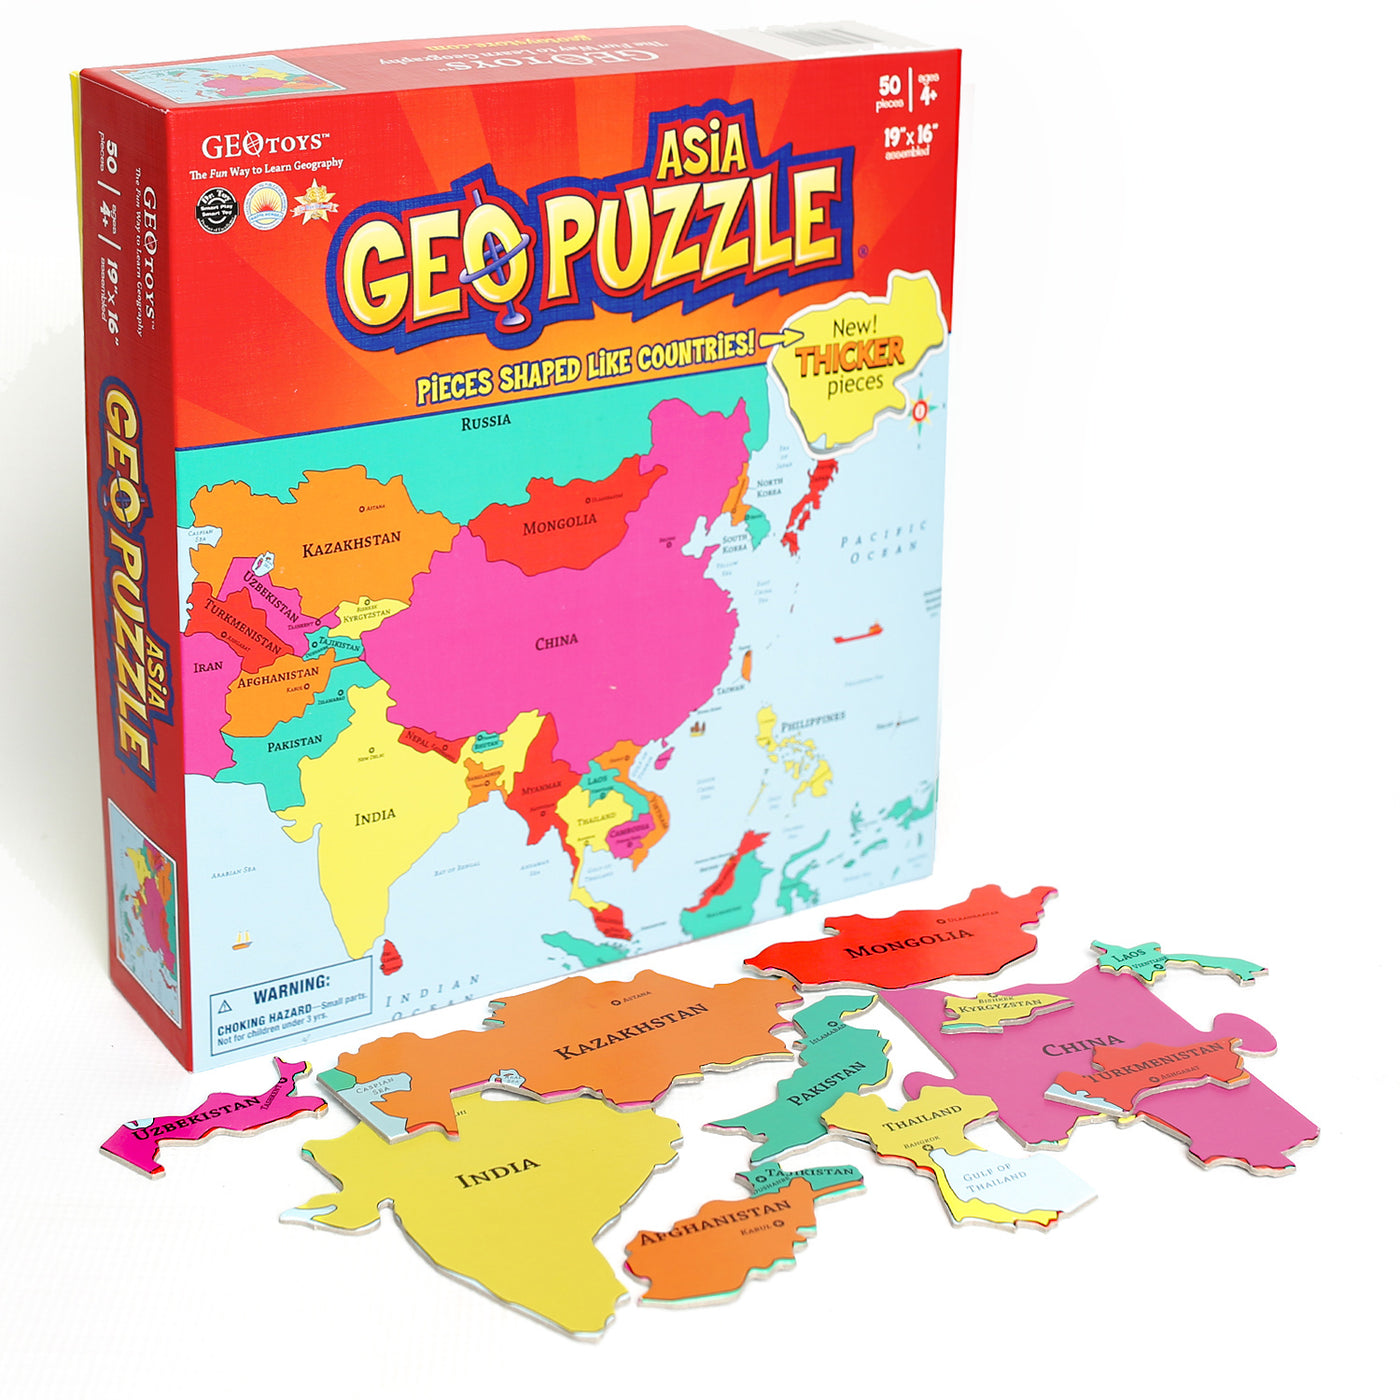 Games,board game,fun game,jigsaw,jigsaw planet,jigsaw puzzle,puzzle,toys,animal toys,trivia,brain game,fun gifts,educational game,piece puzzles,animal puzzle,minded games,learning by games,magnetic puzzle,geography games,tabletop game,world geography games